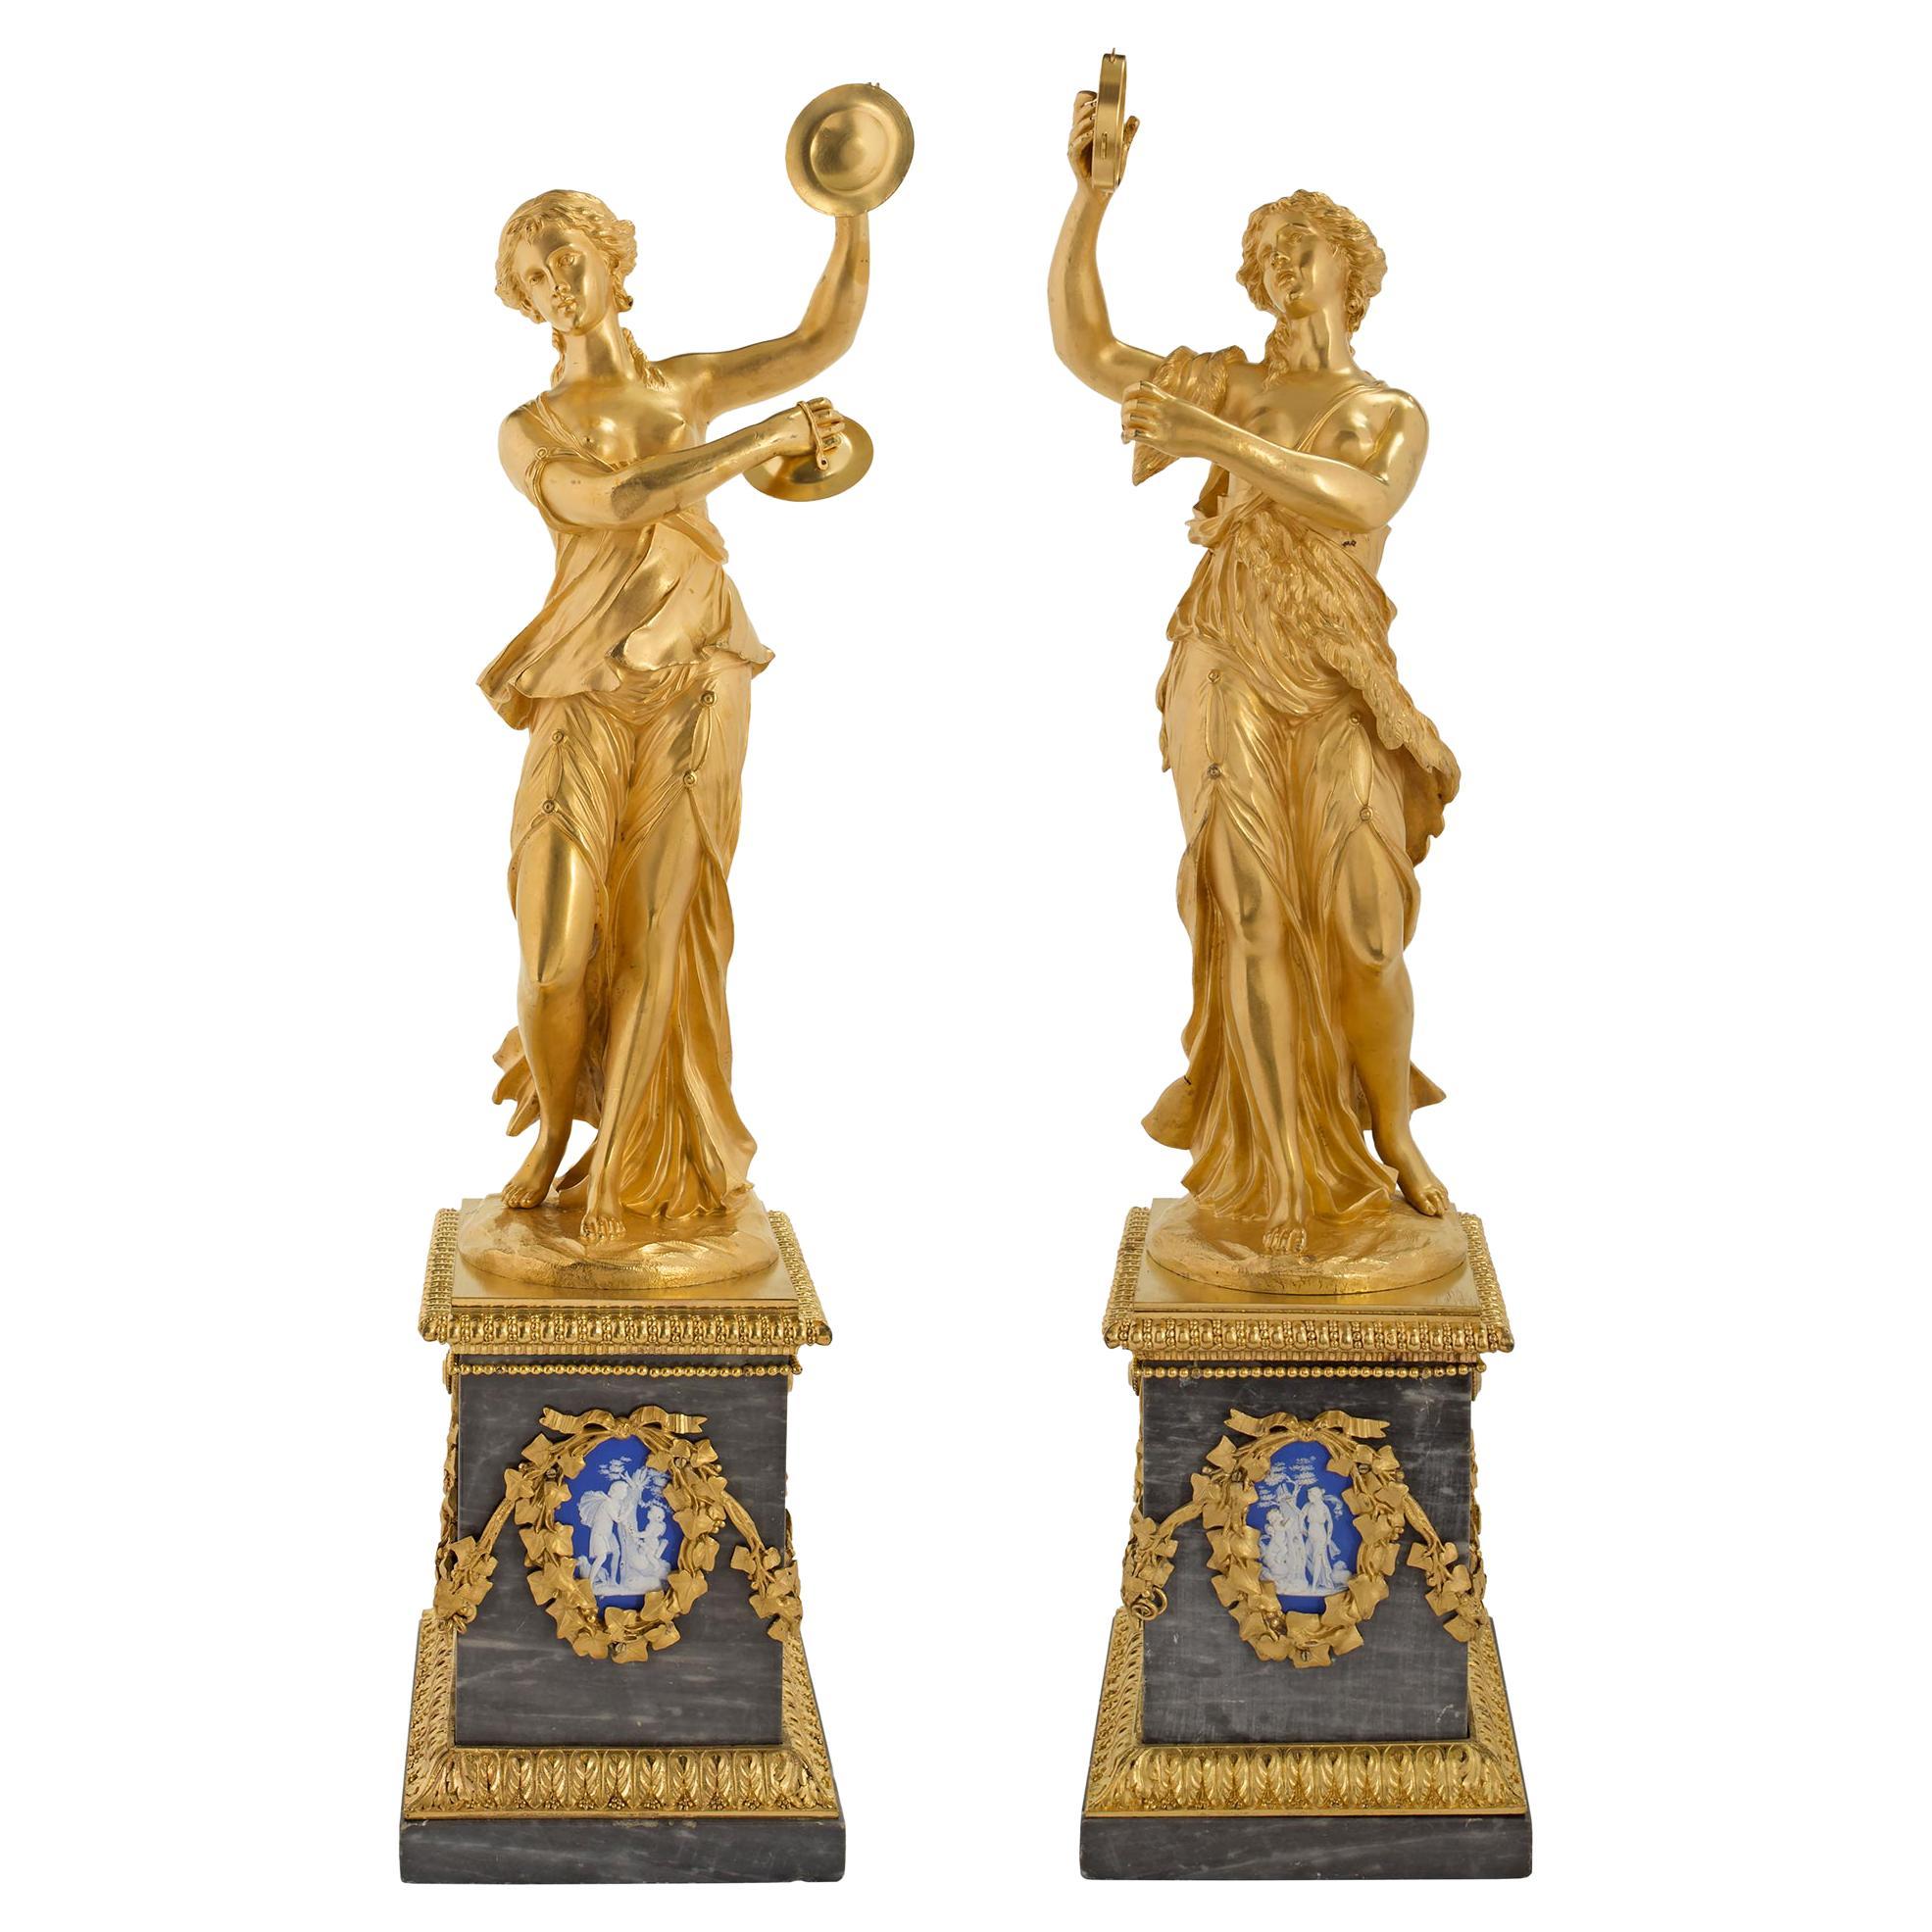 Pair of French Mid-19th Century Louis XVI Style Decorative Statues